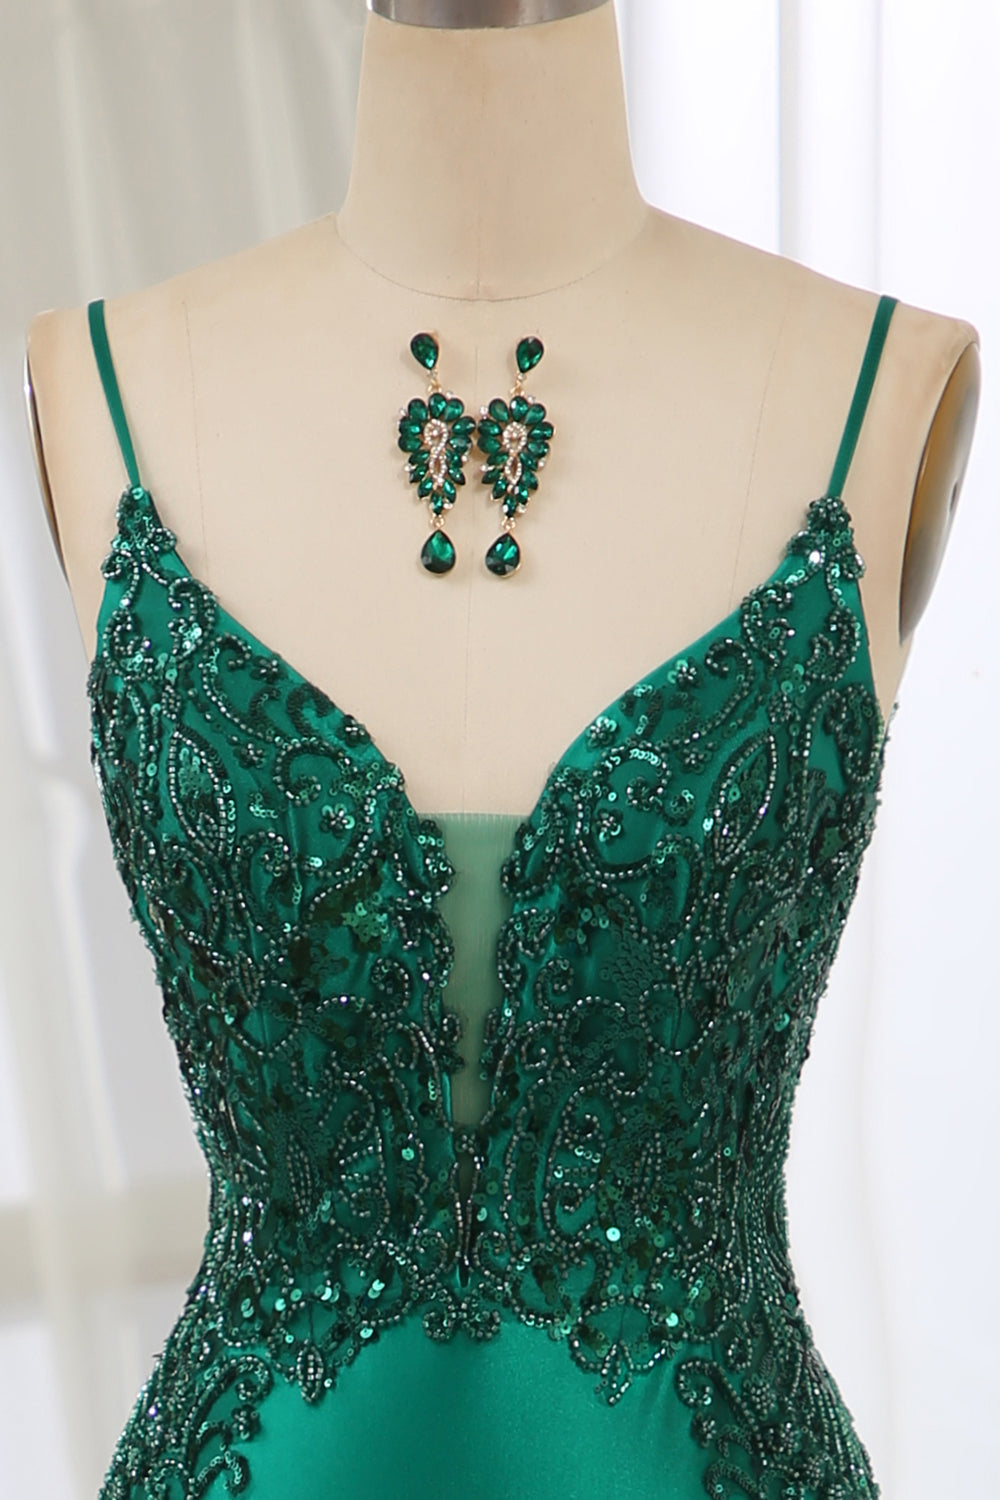 Party Dresses Designs, Dark Green Spaghetti Straps Mermaid Satin Prom Dress With Appliques